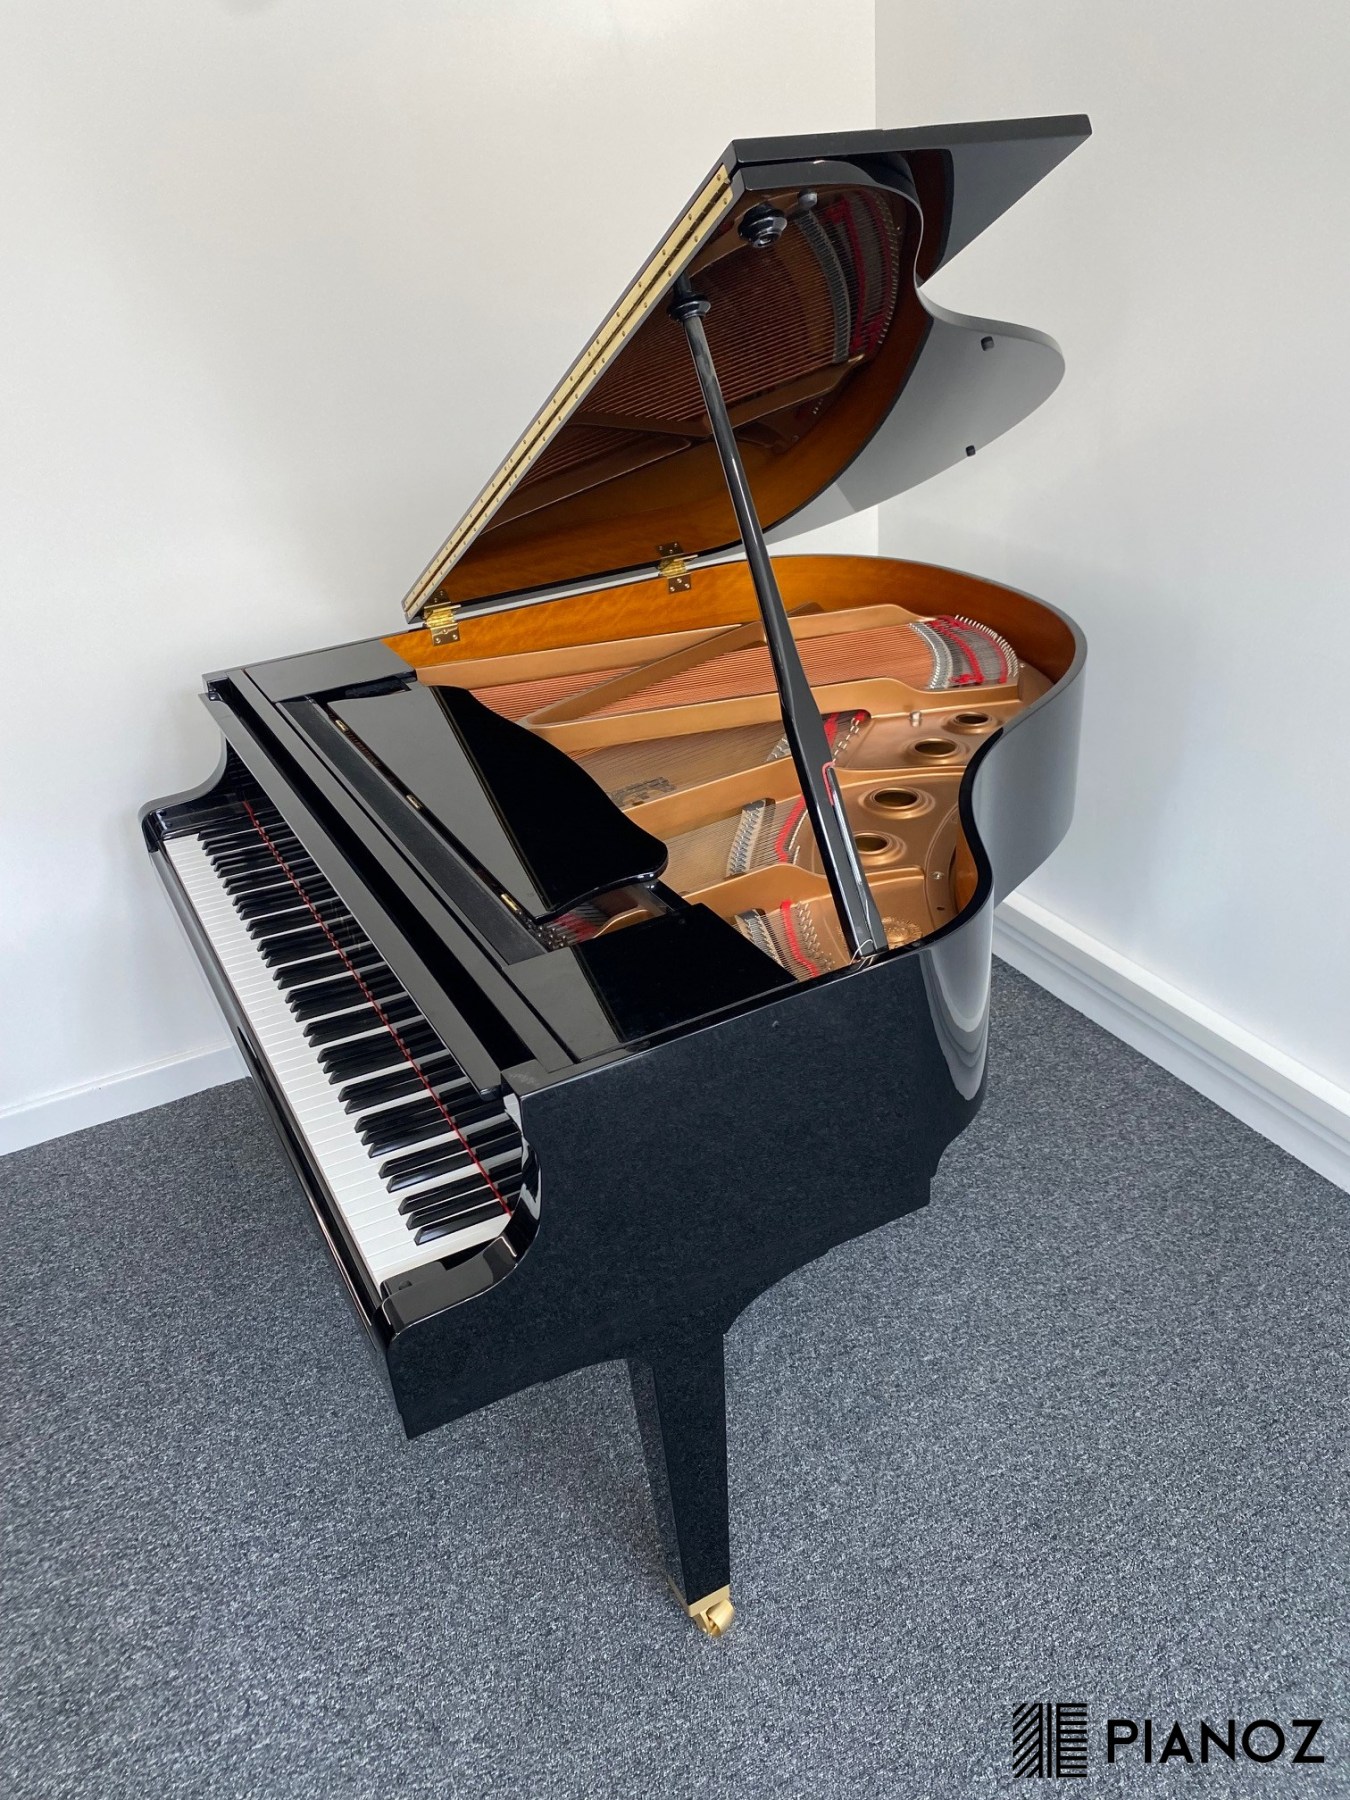 Yamaha GB1K Silent System Baby Grand Piano piano for sale in UK